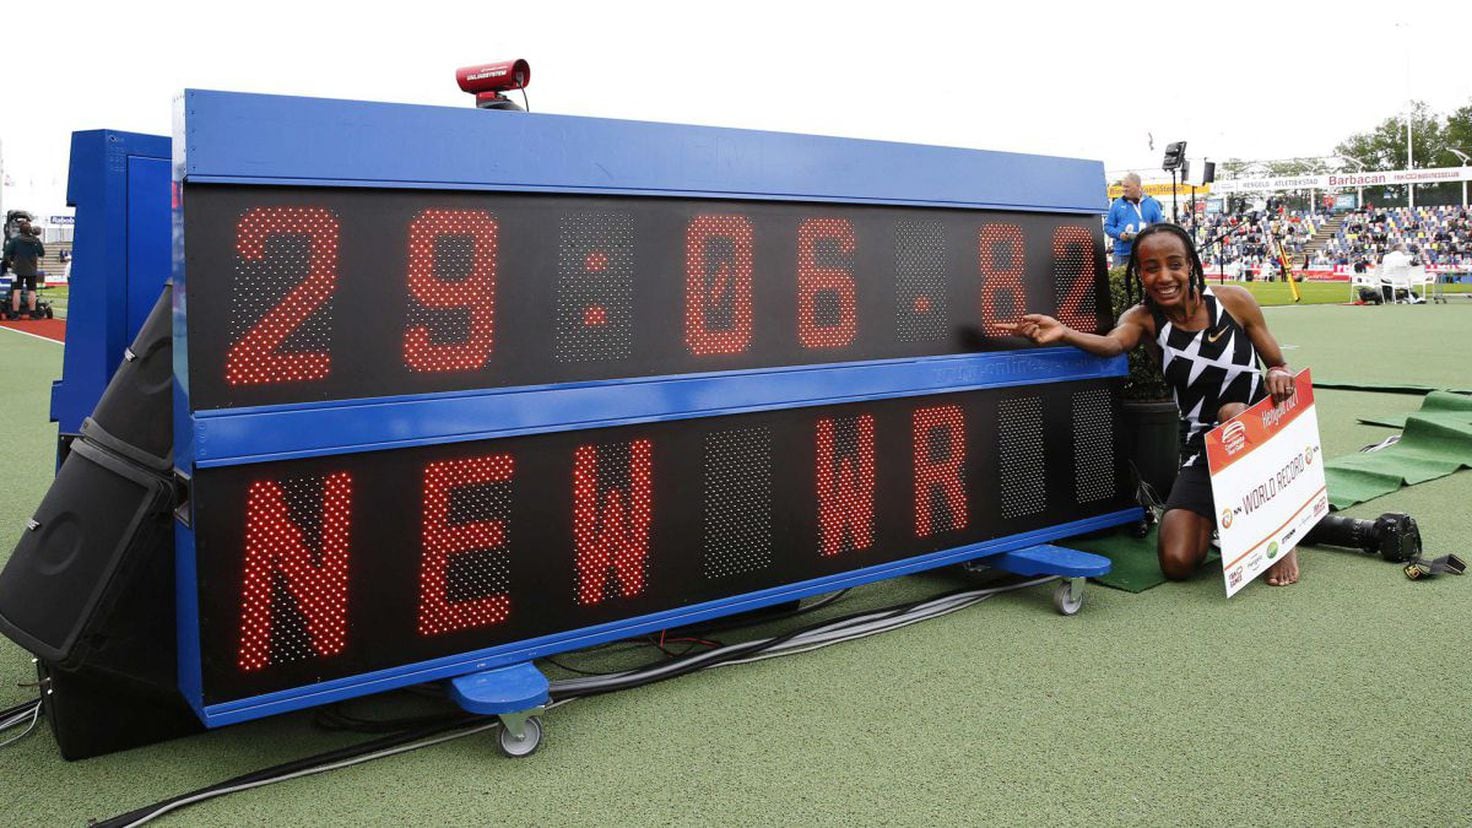 Sifan Hassan - Dutch Runner Breaks the 10,000-Meter World Record